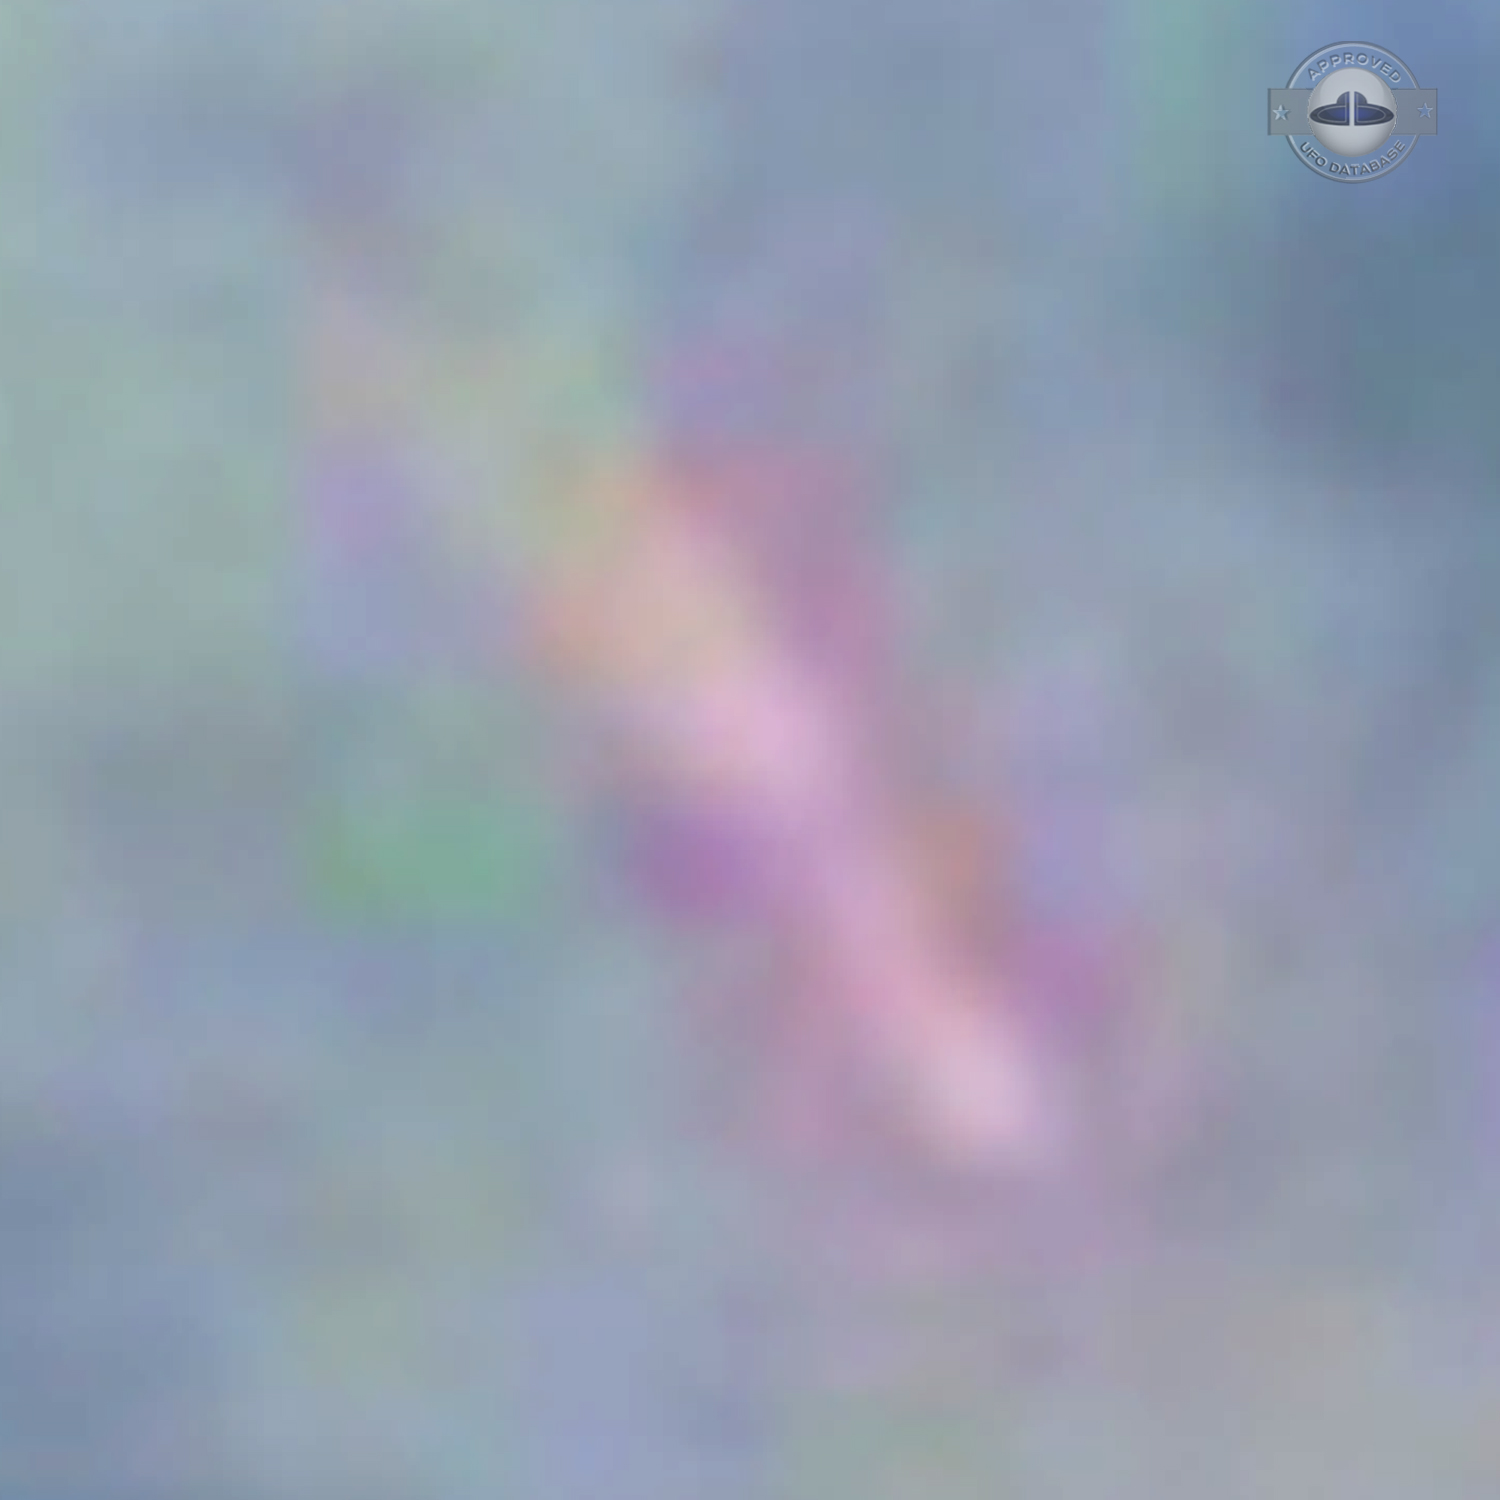 Fire Dragon UFO with glowing tail in clouds over Hefei China | 2011 UFO Picture #234-5